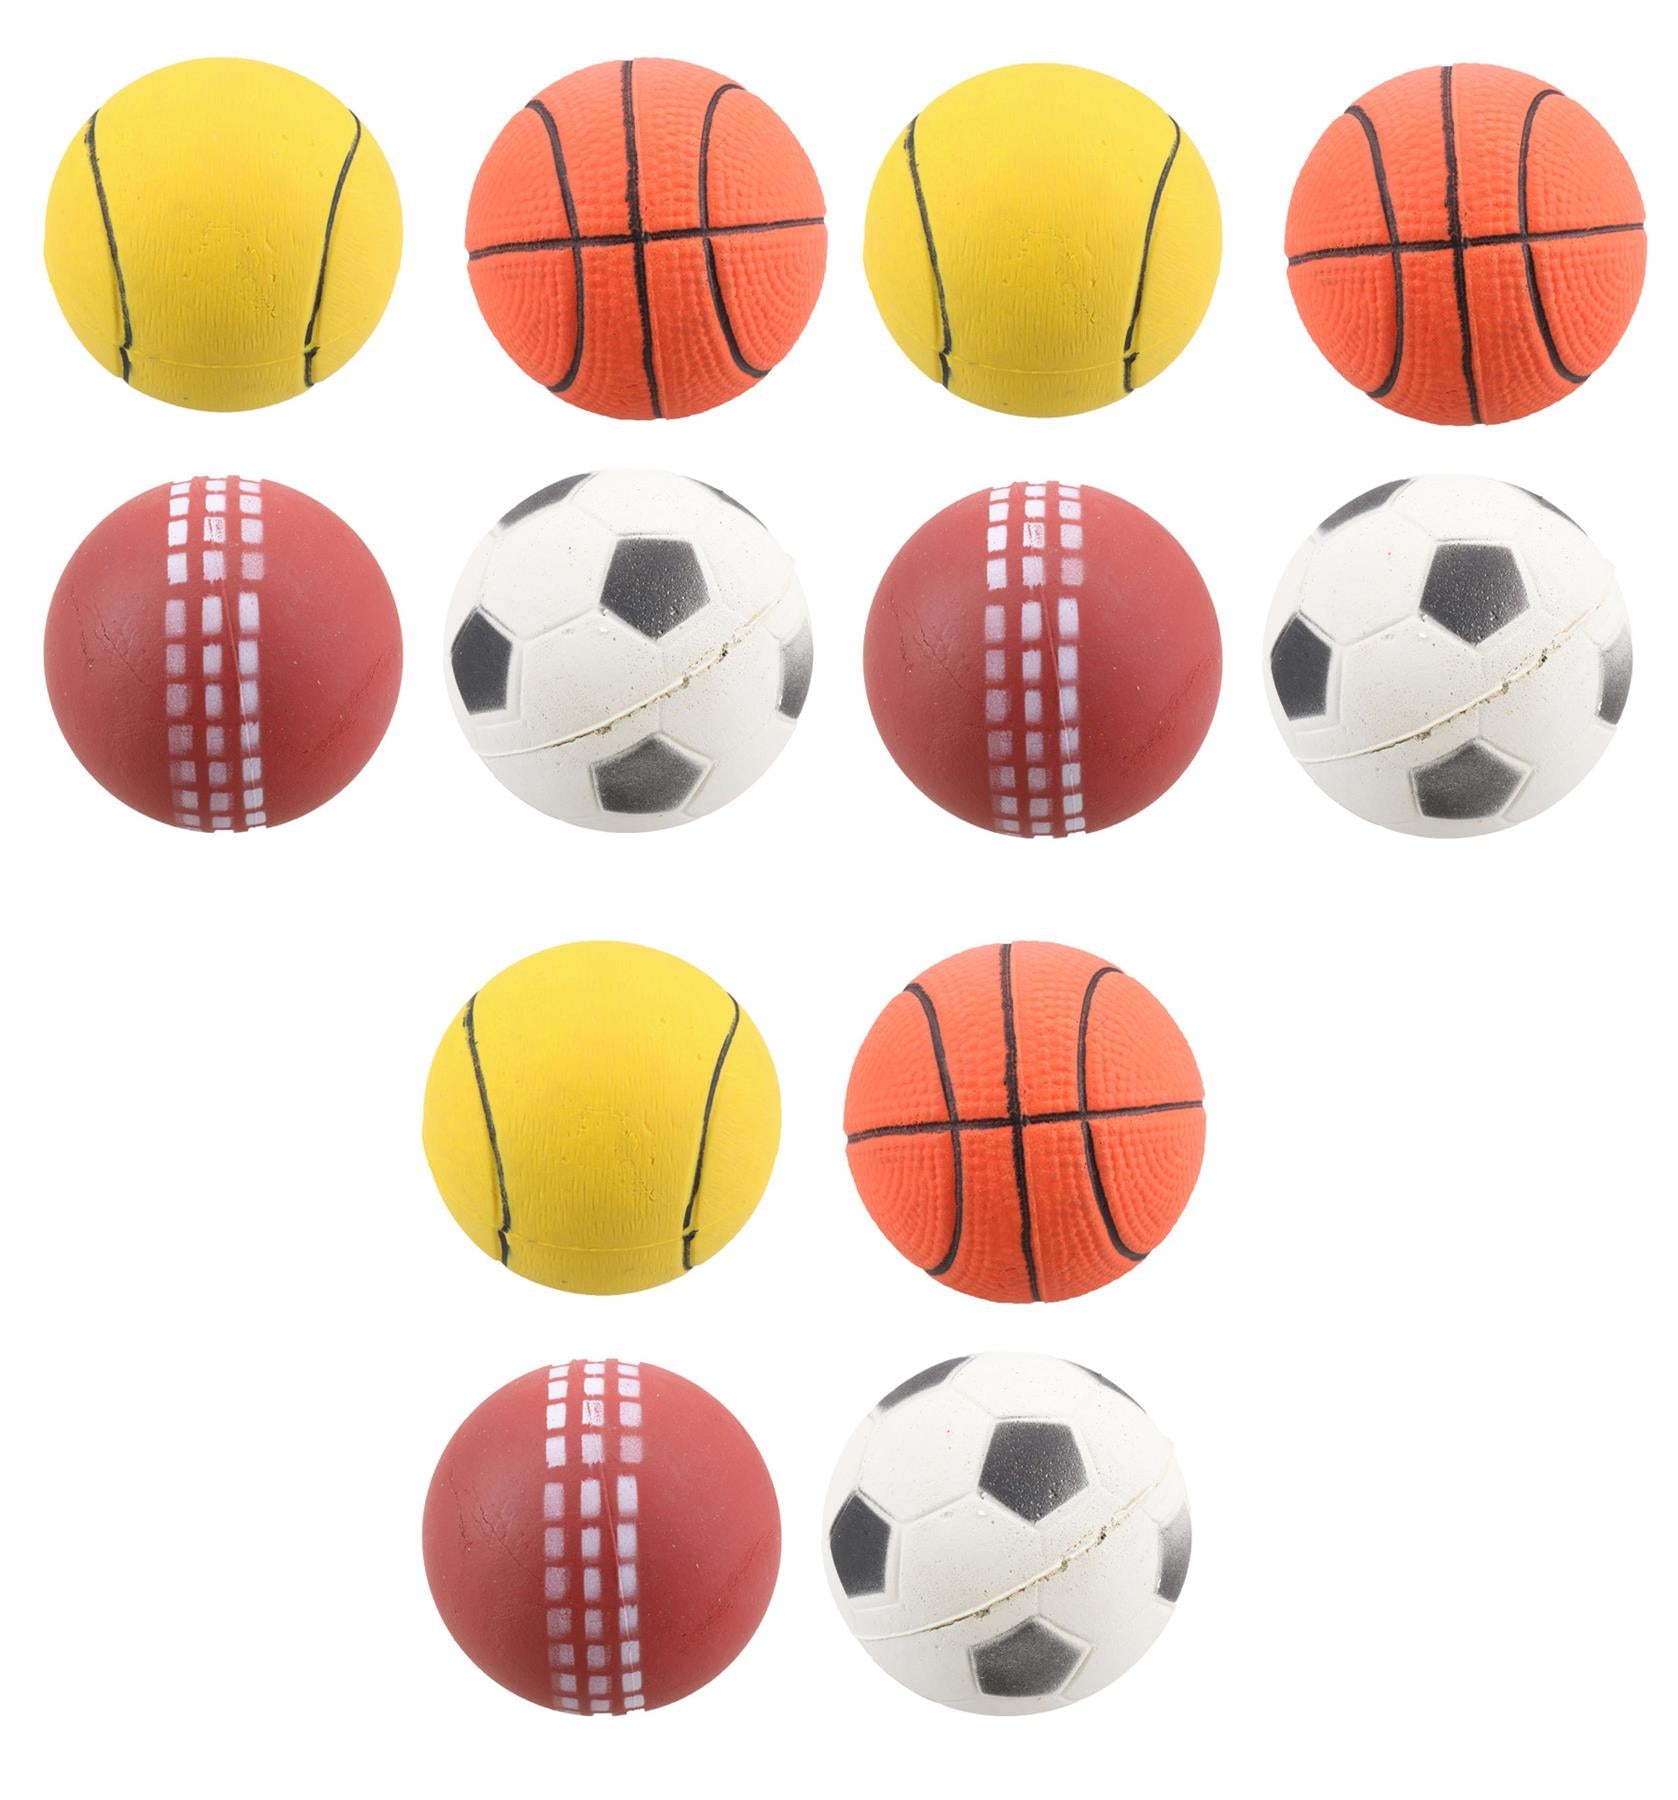 Dog Puppy Play Time Rubber Bouncy Small Sports Ball 6cm 12PK